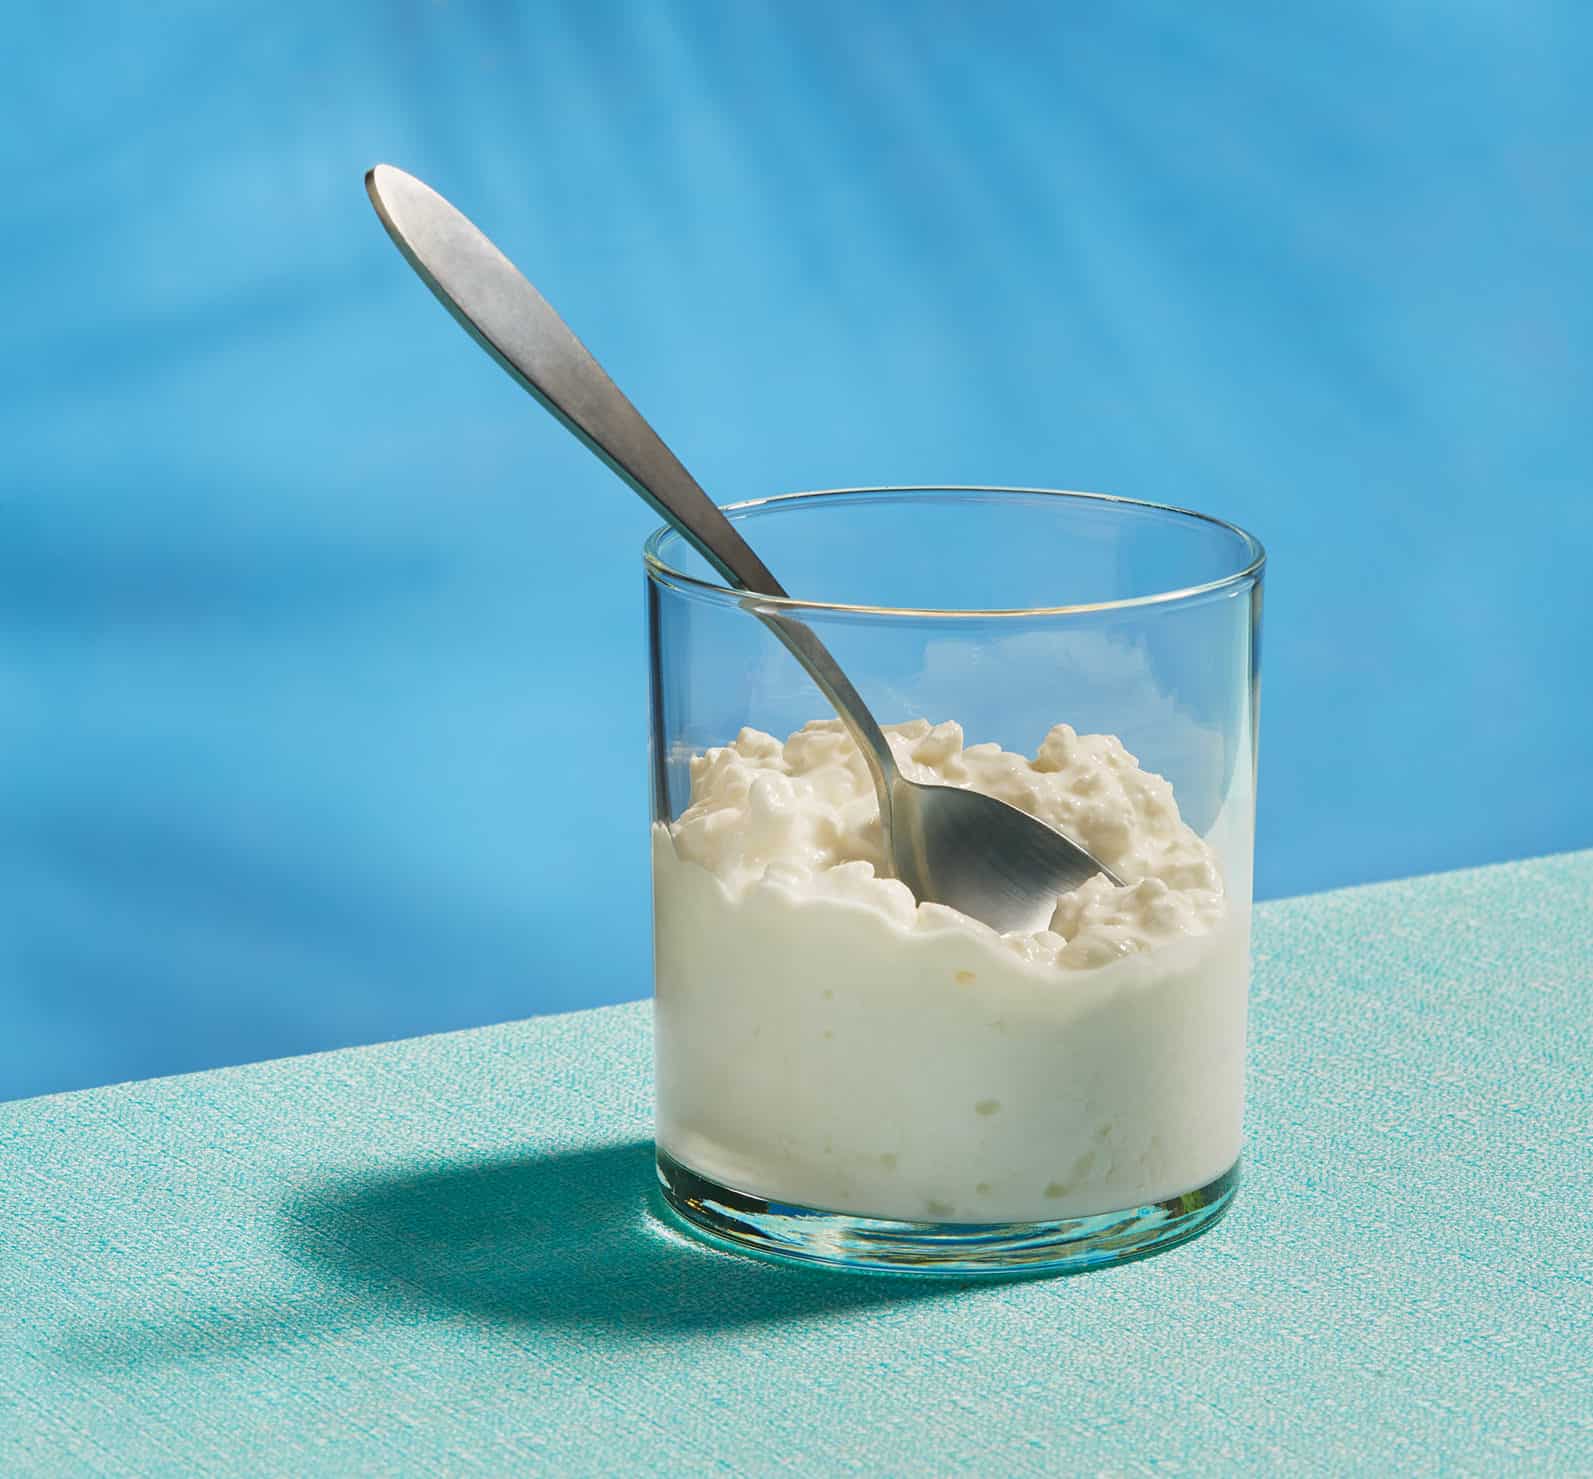 7 Reasons Why Cottage Cheese Should Be On Your Grocery List (plus culture’s favorite brands)